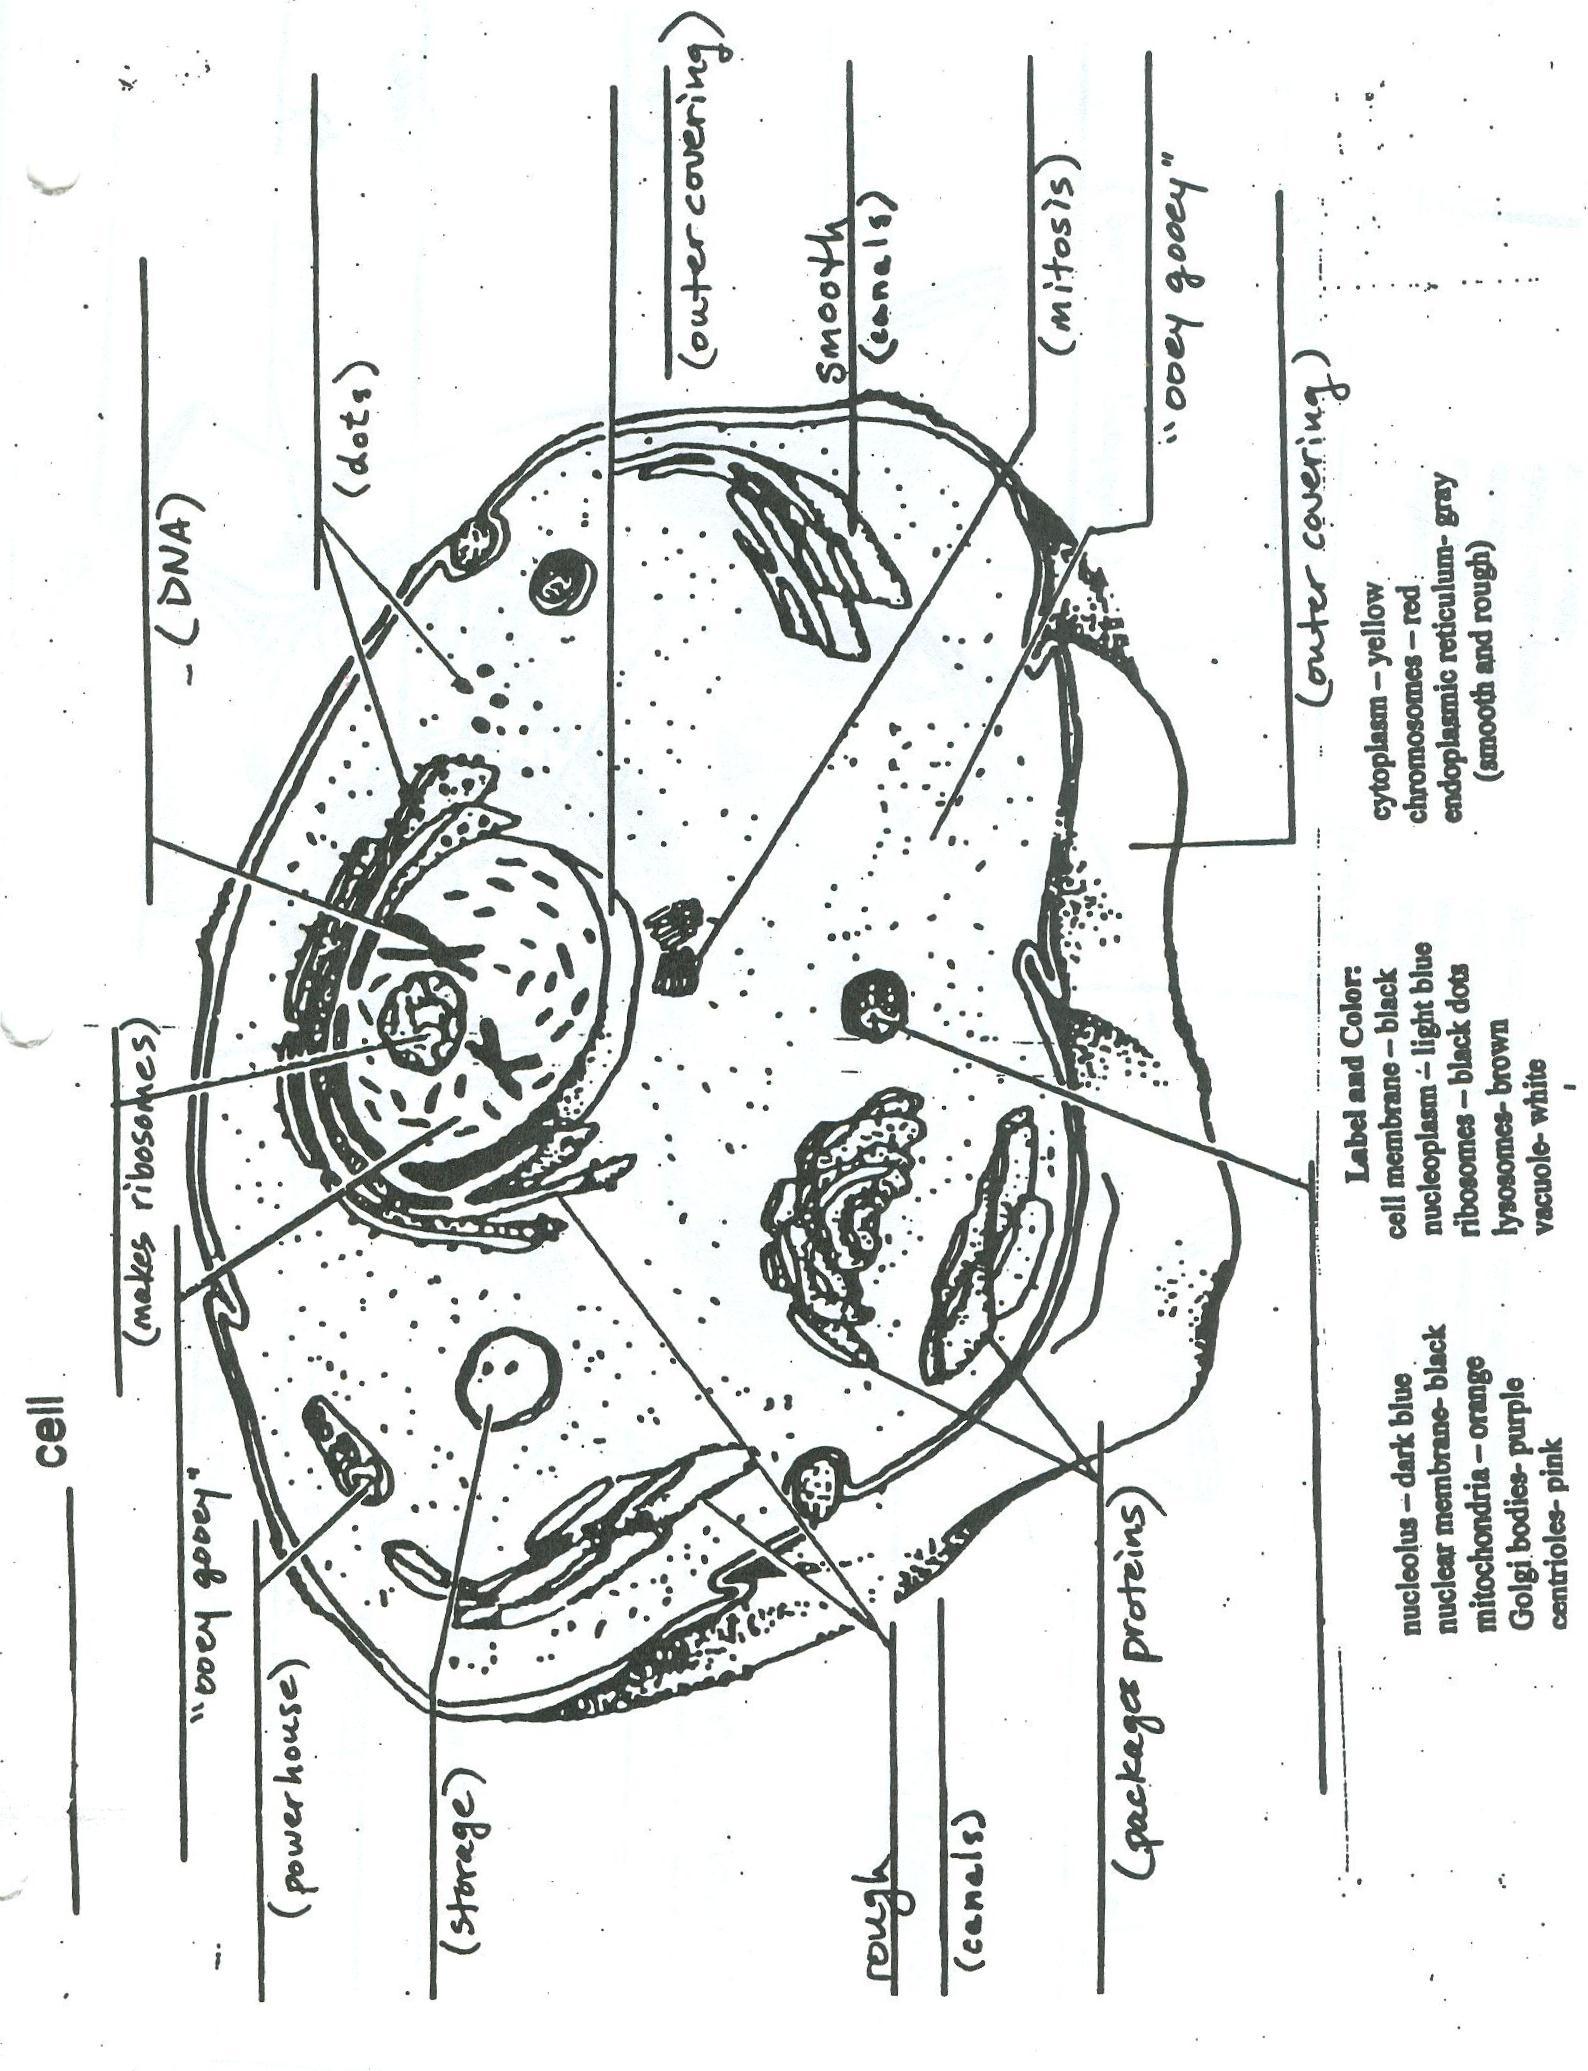 Labeled Plant And Animal Cells Diagram